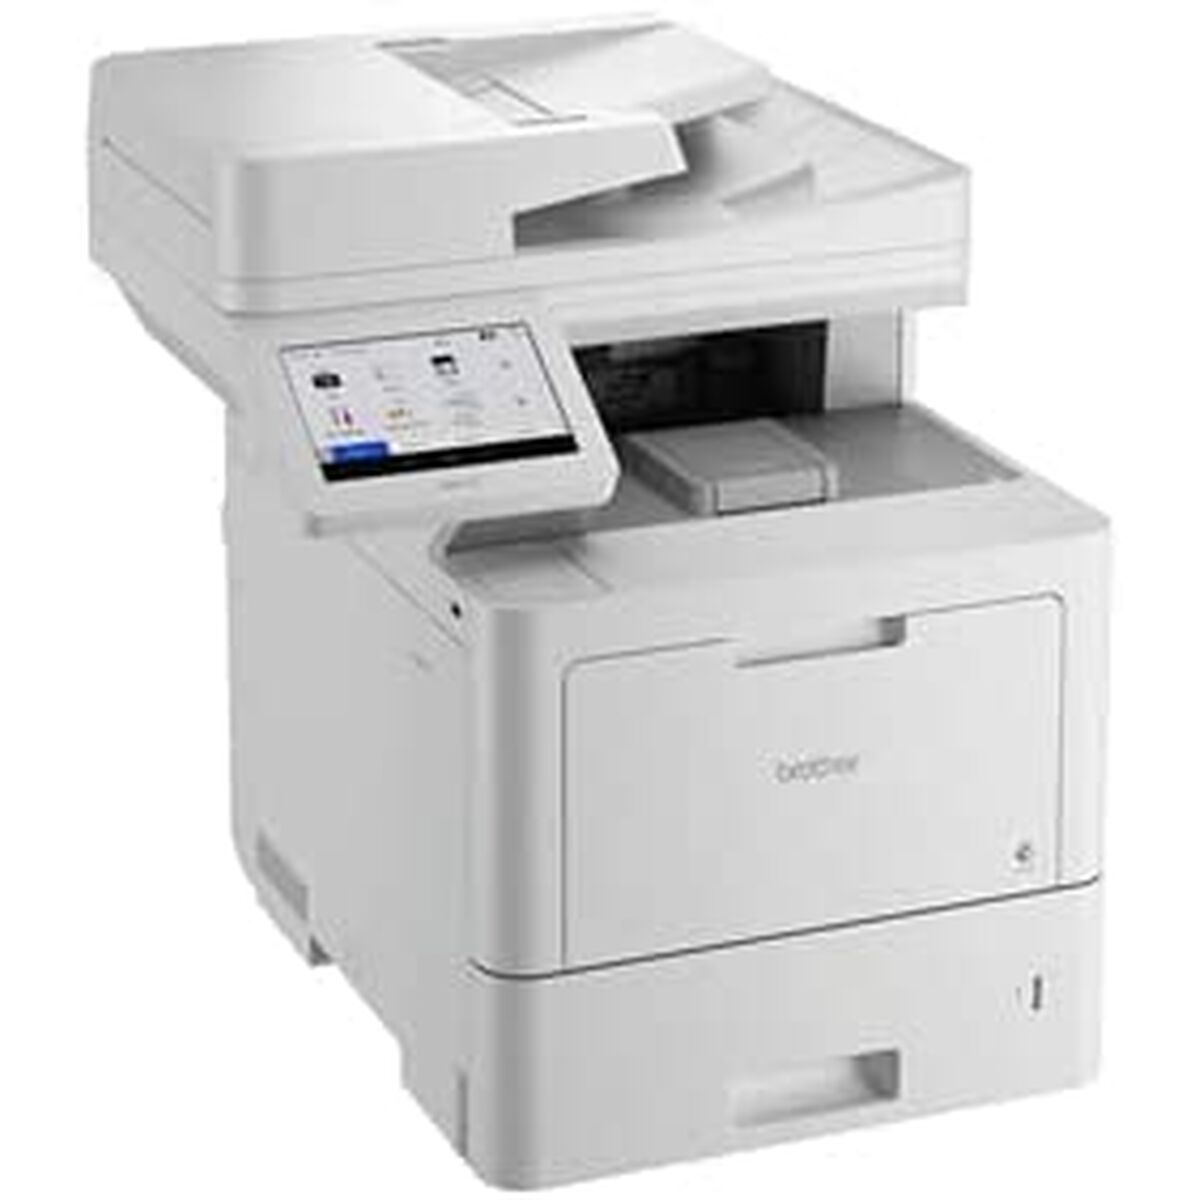 Multifunction Printer   Brother MFCL9630CDNRE1, Brother, Computing, Printers and accessories, multifunction-printer-brother-mfcl9630cdnre1, Brand_Brother, category-reference-2609, category-reference-2642, category-reference-2645, computers / peripherals, Condition_NEW, office, Price_+ 1000, Teleworking, RiotNook